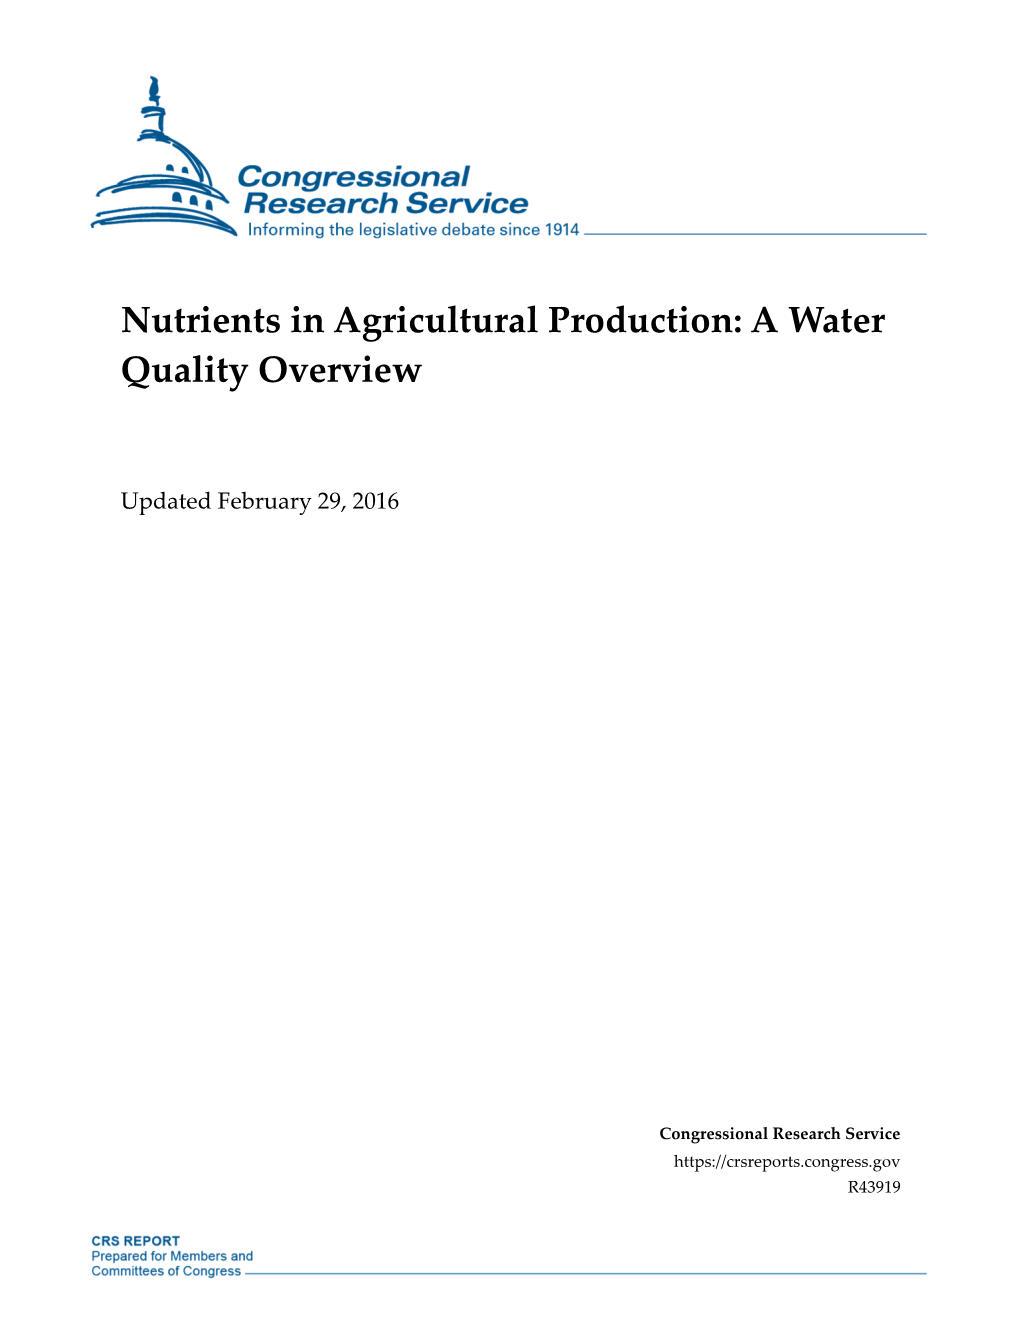 Nutrients in Agricultural Production: a Water Quality Overview